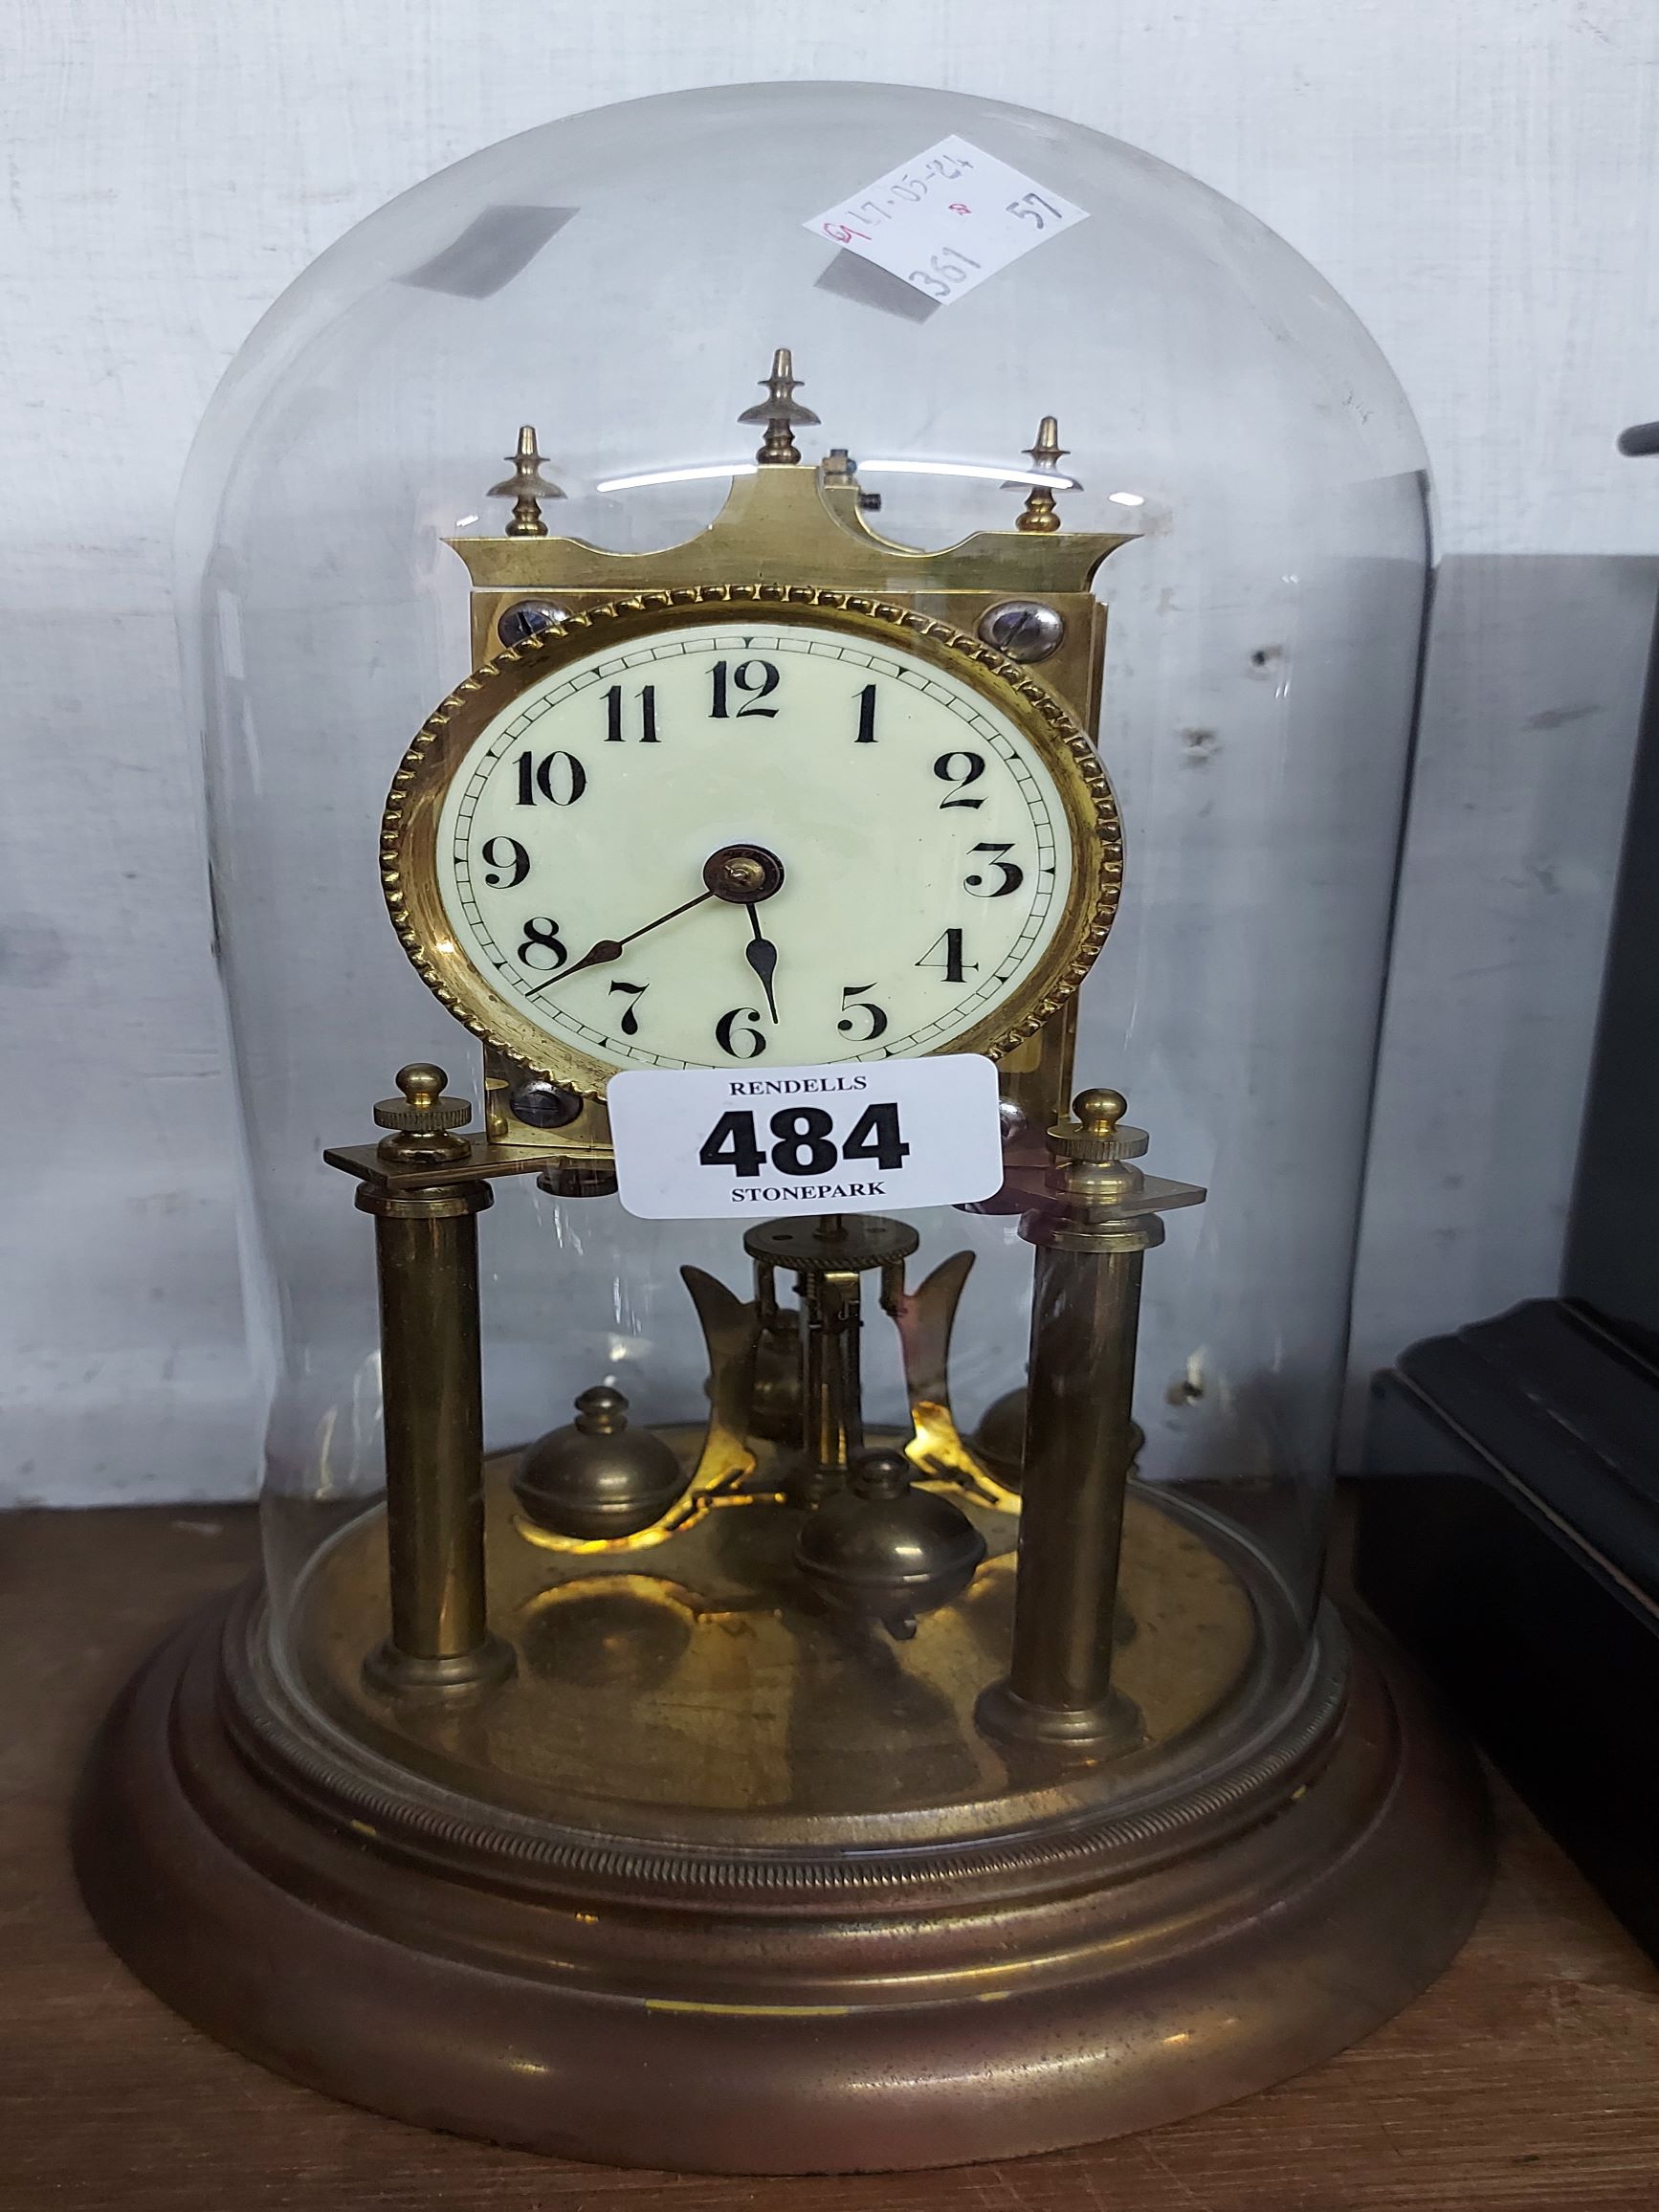 A vintage brass anniversary clock with Arabic numerals and ball pendulum, under a glass dome